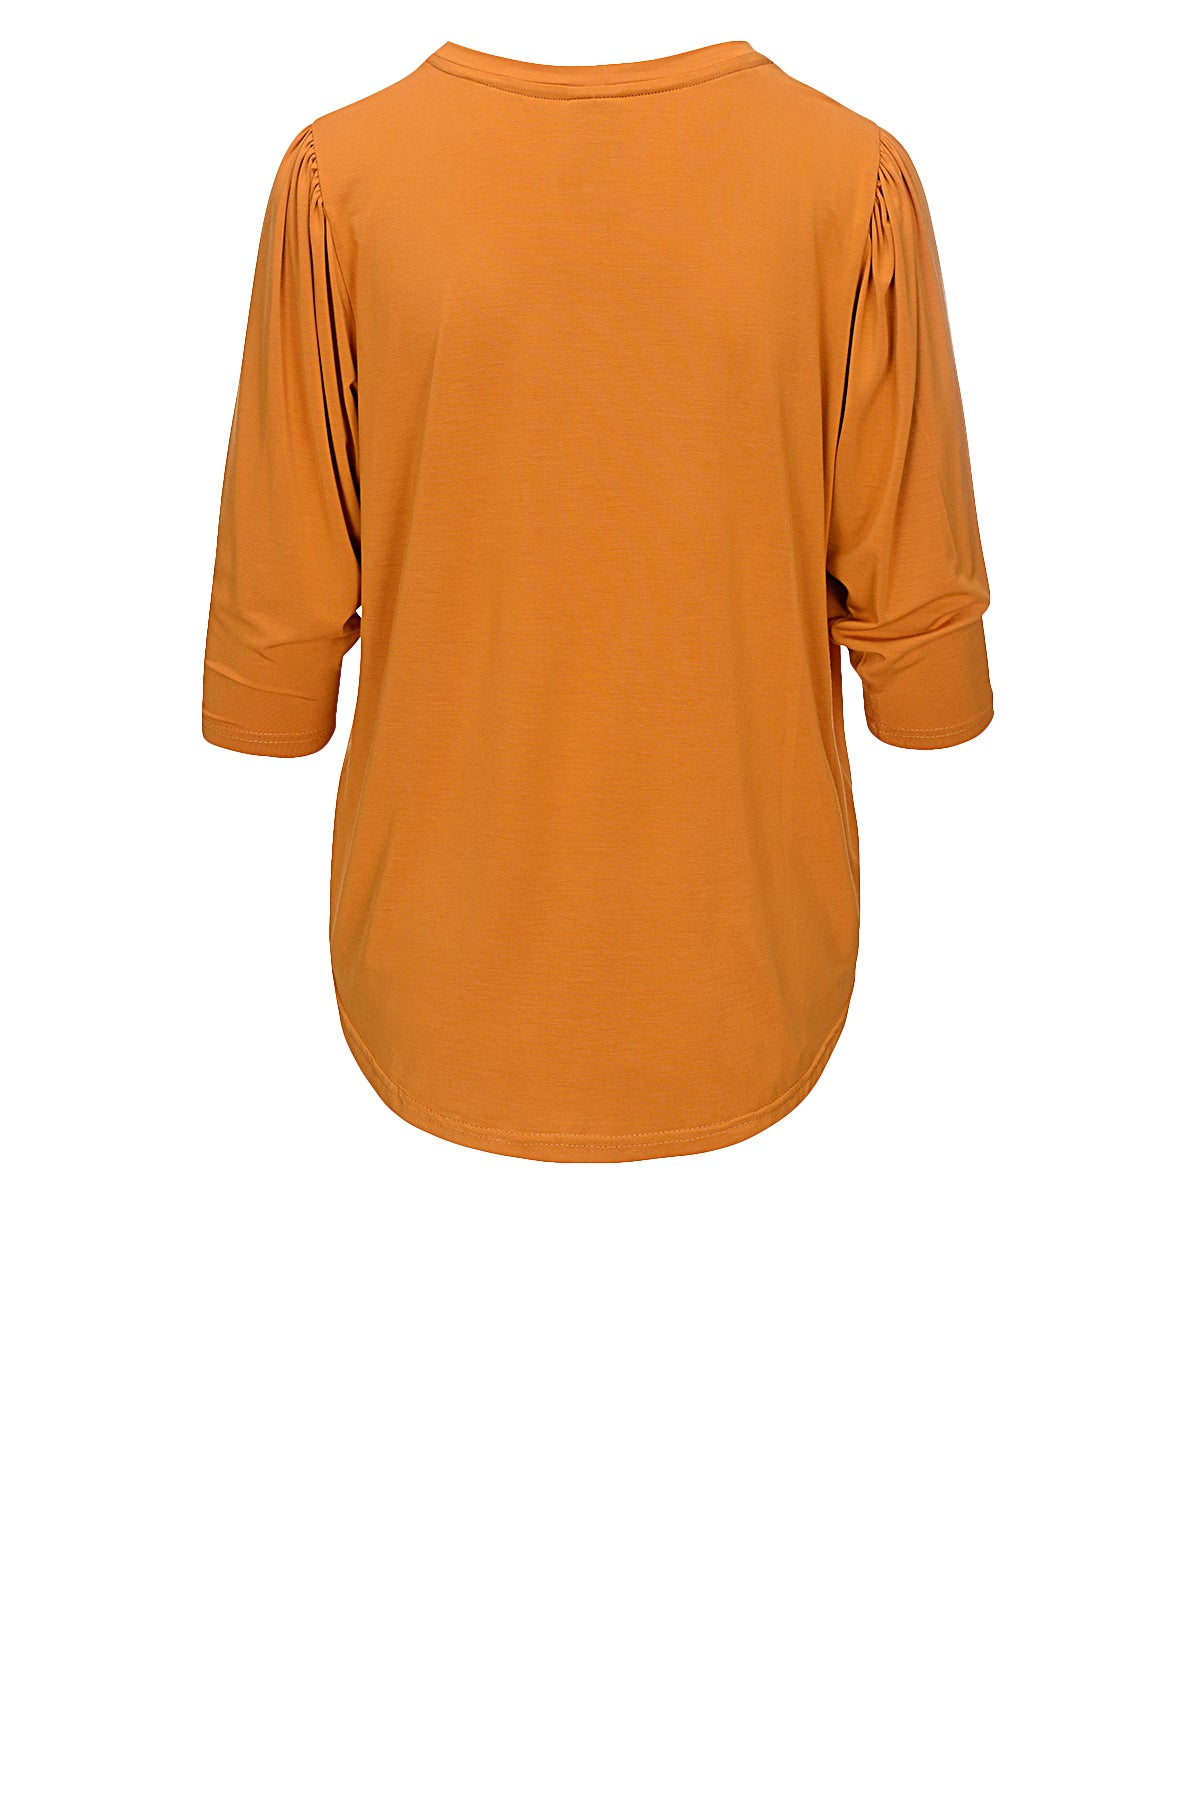 LUXZUZ // ONE TWO Lailong Bamboo T-Shirt 236 Sudan Brown